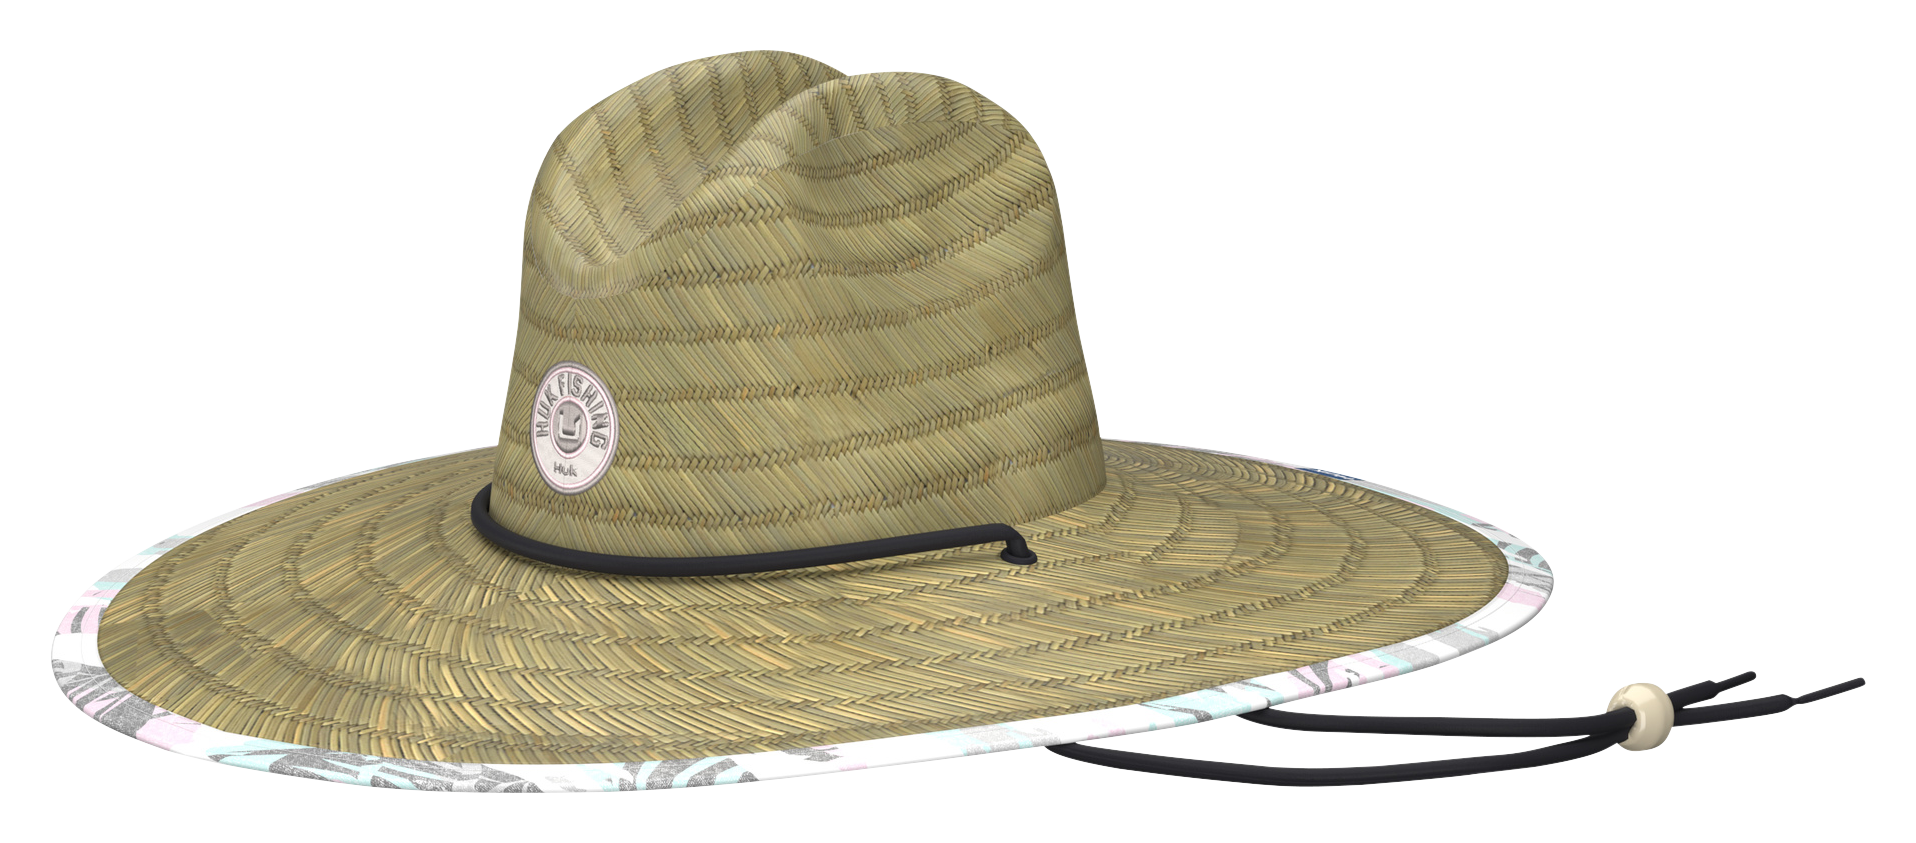 Our Point of View on HUK Women's Straw Fishing Hats From  